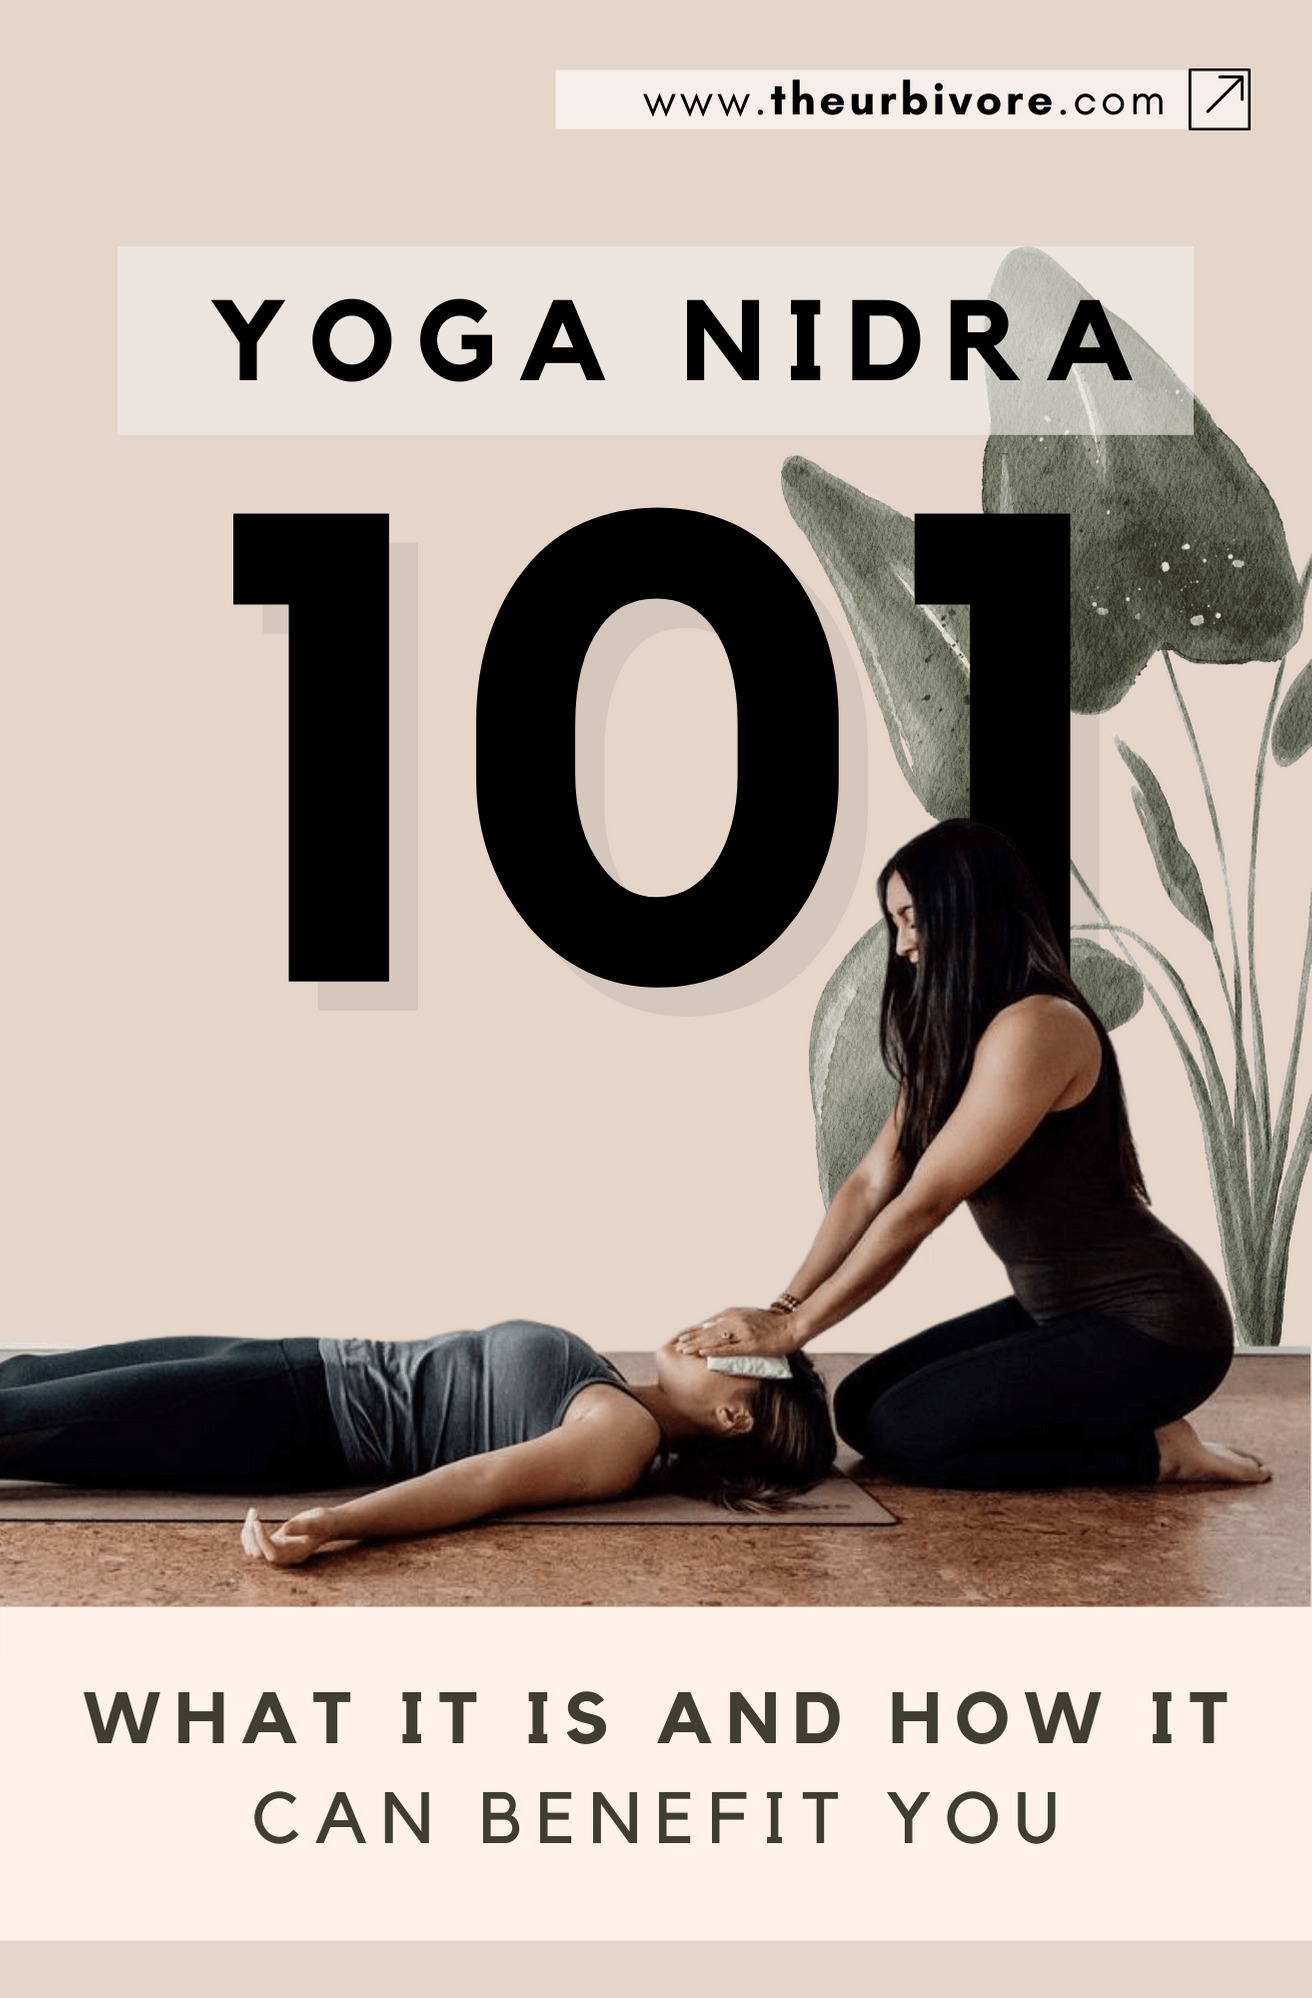 Yoga Nidra 101 – What It Is And How It Can Benefit You